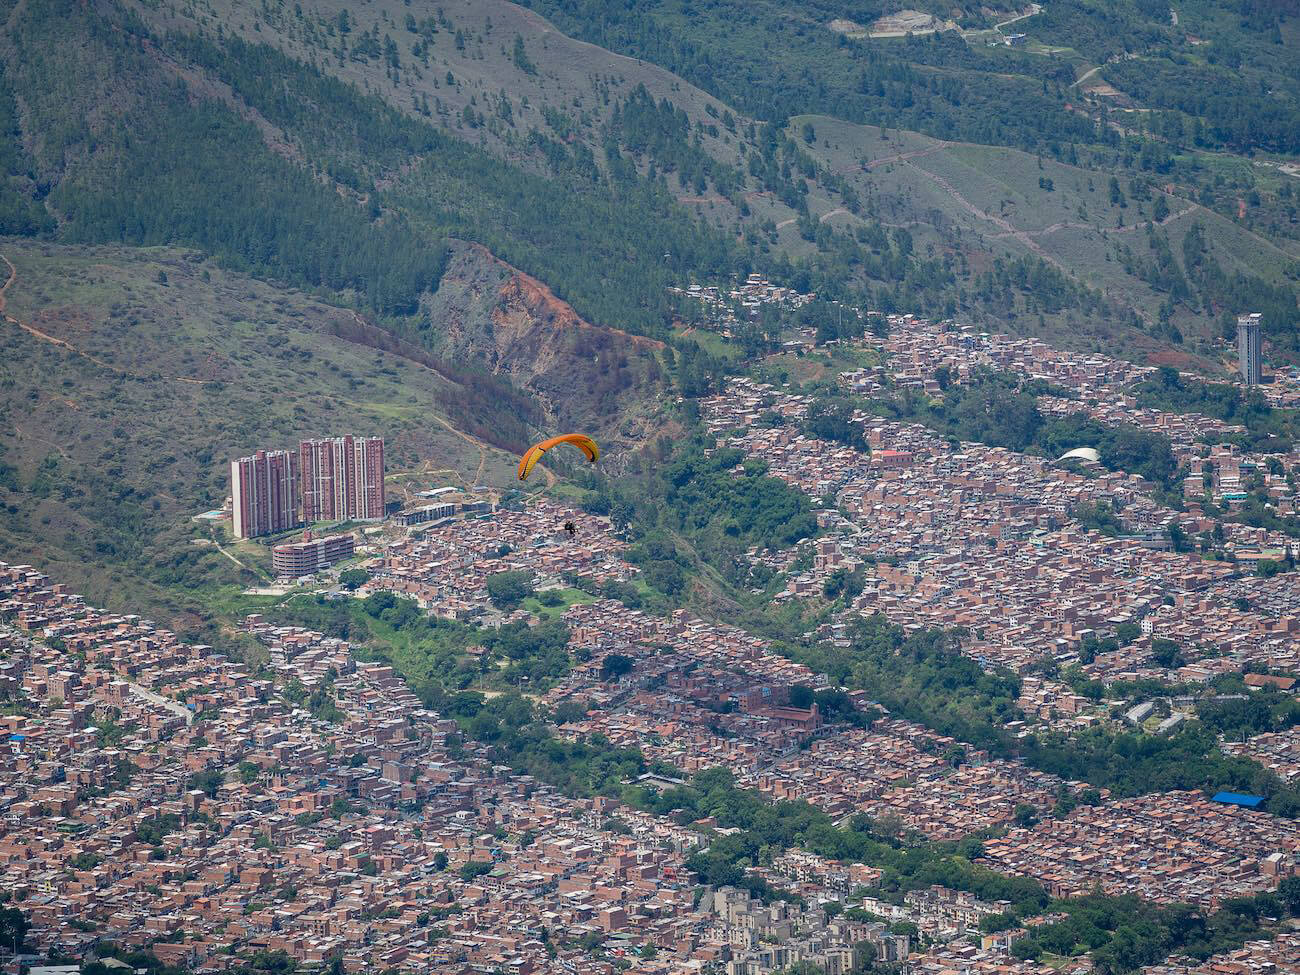 Paraglider in sky with city below